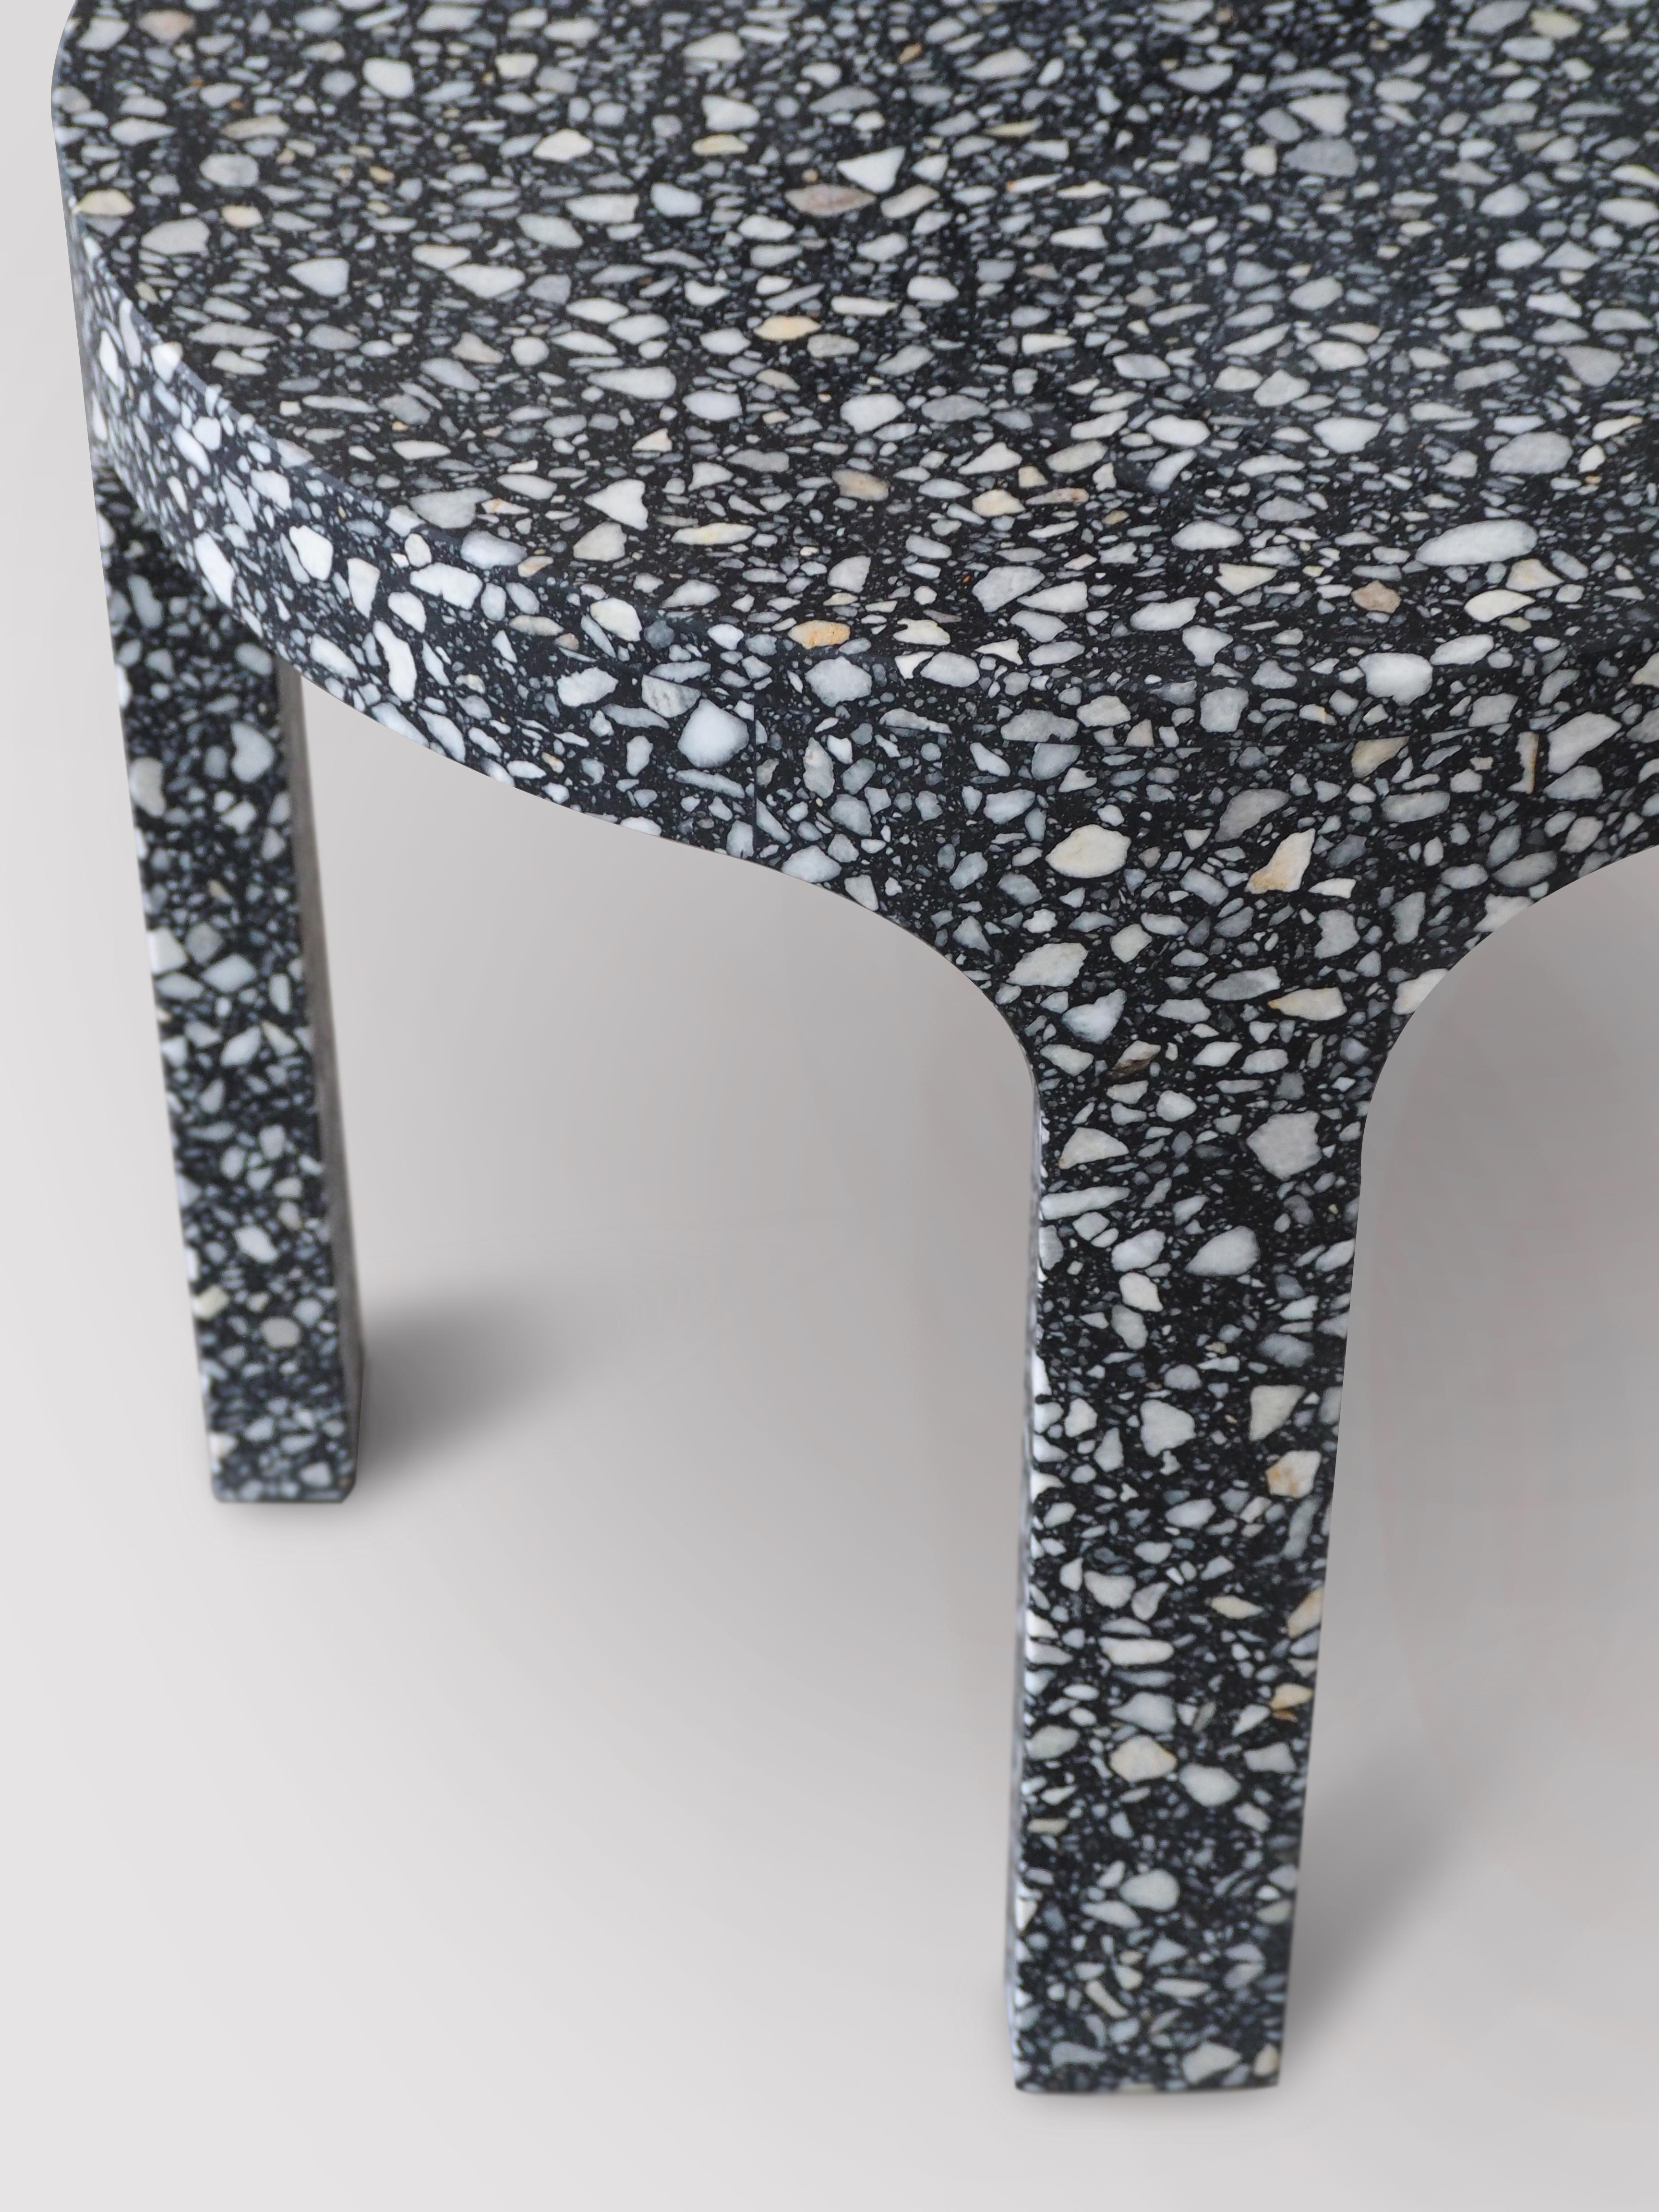 Loggia is a side table made in marble or resin terrazzo.
Designed by Matteo Leorato
A material, traditionally used in the Renaissance for the paving of the noble palaces, here is reinterpreted in the third dimension carved and carefully polished